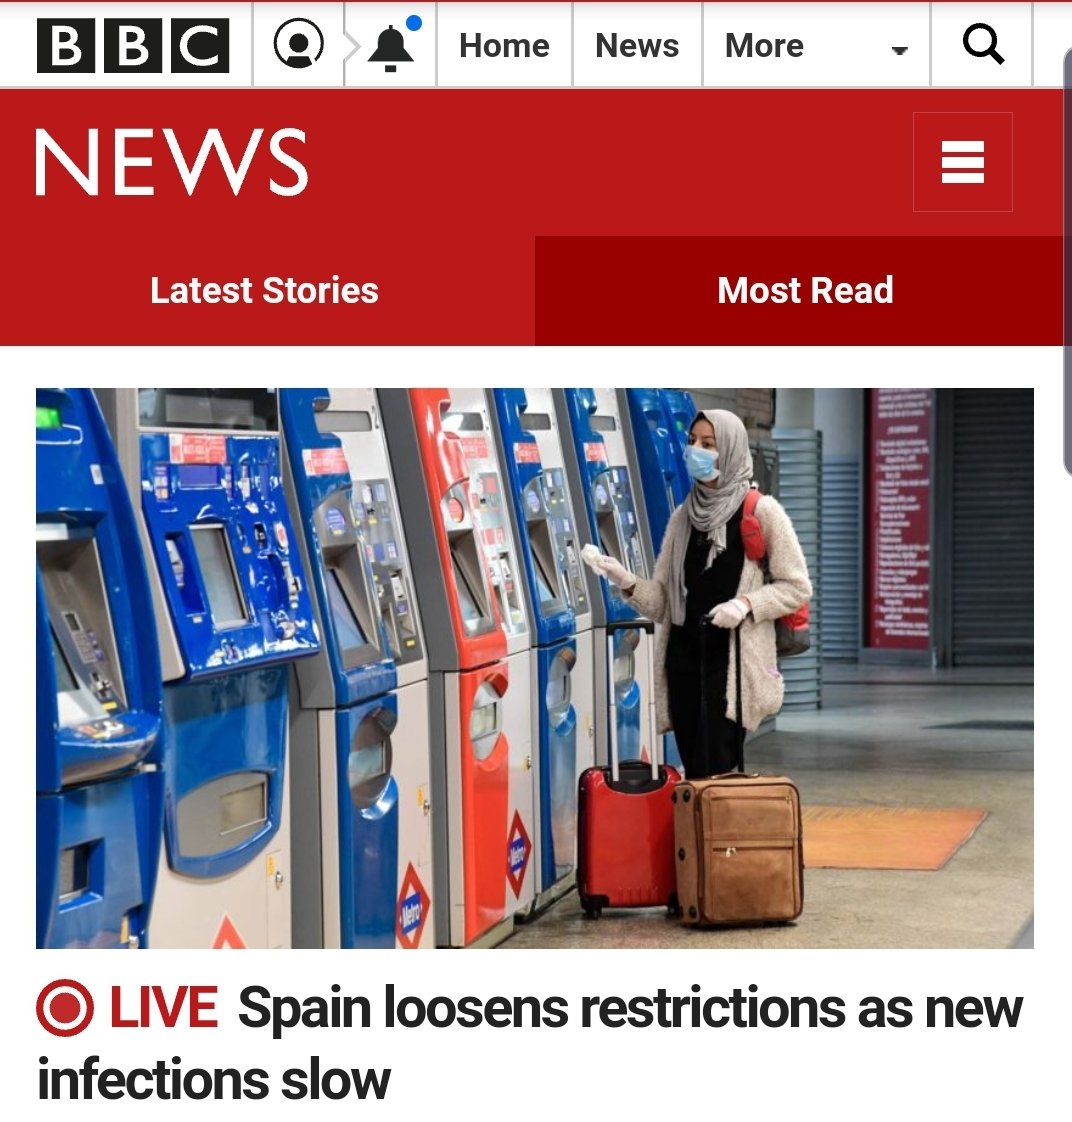 The front page of the BBC news website currently, with a headline about coronavirus in Spain and an image of a Muslim woman in hijab.